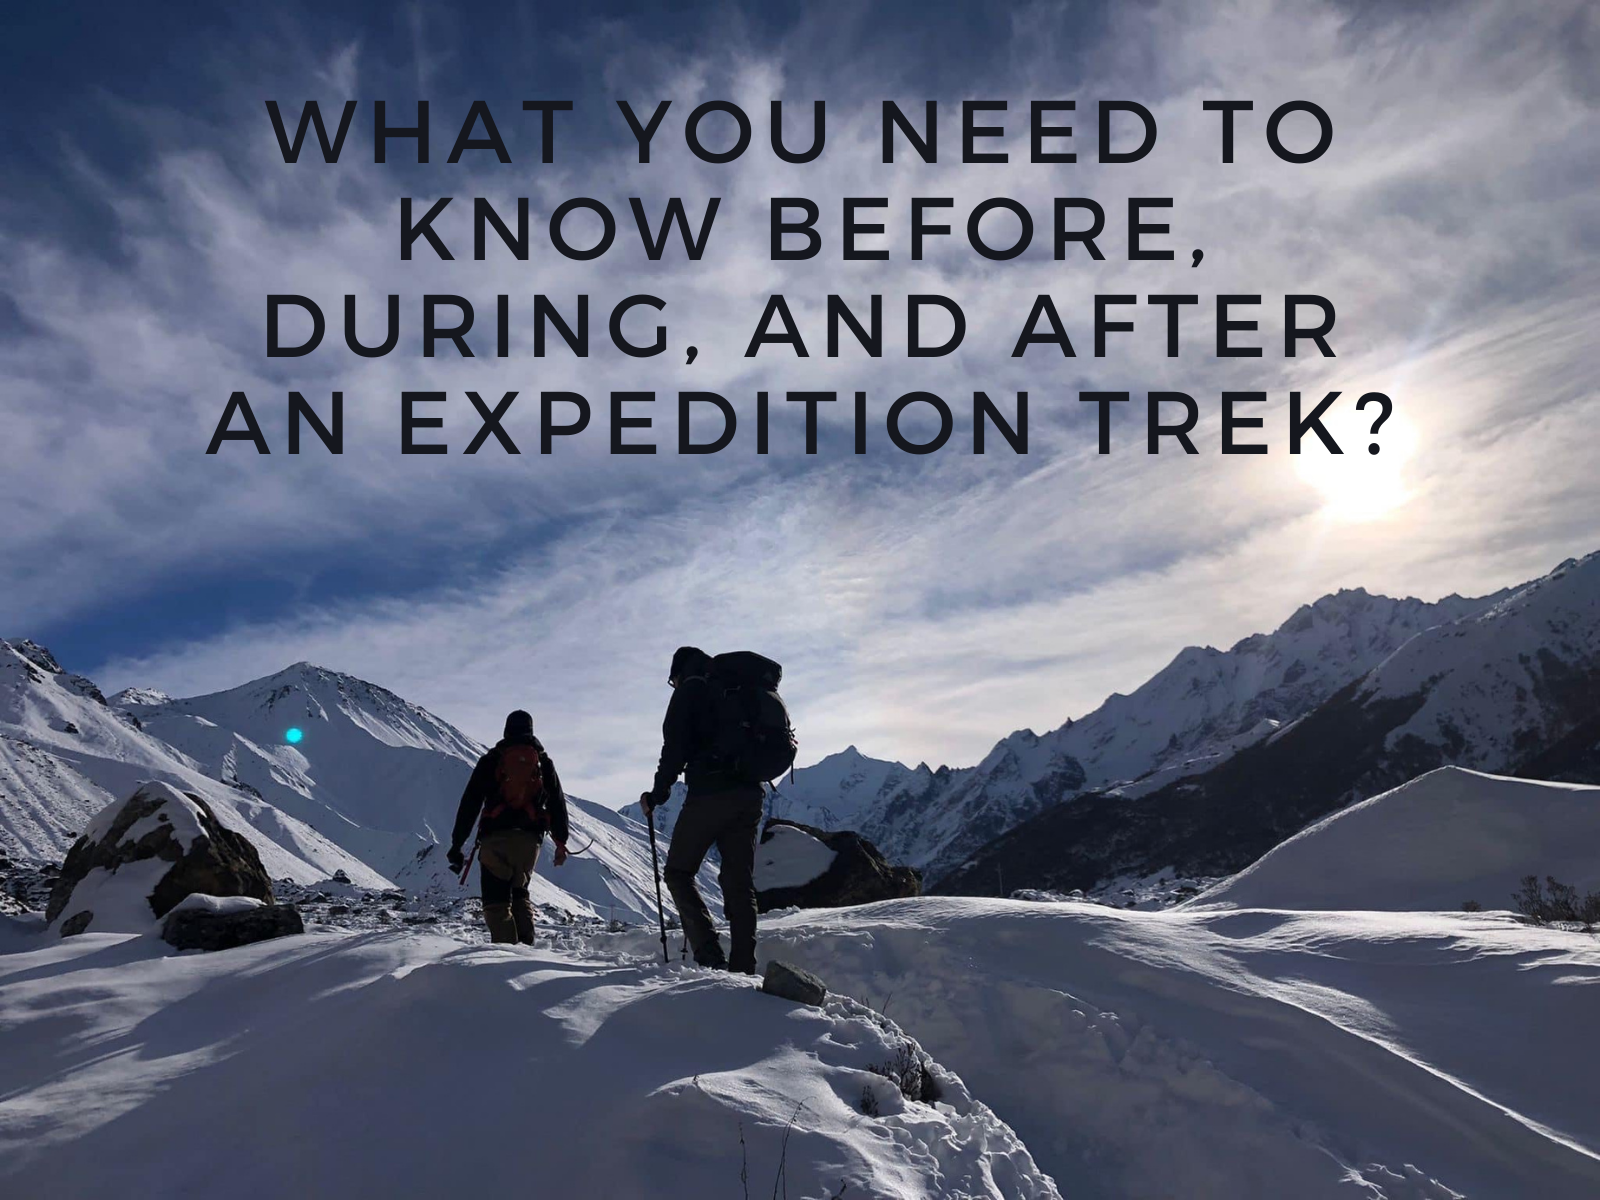 What You Need to Know Before, During, and After an Expedition Trek?